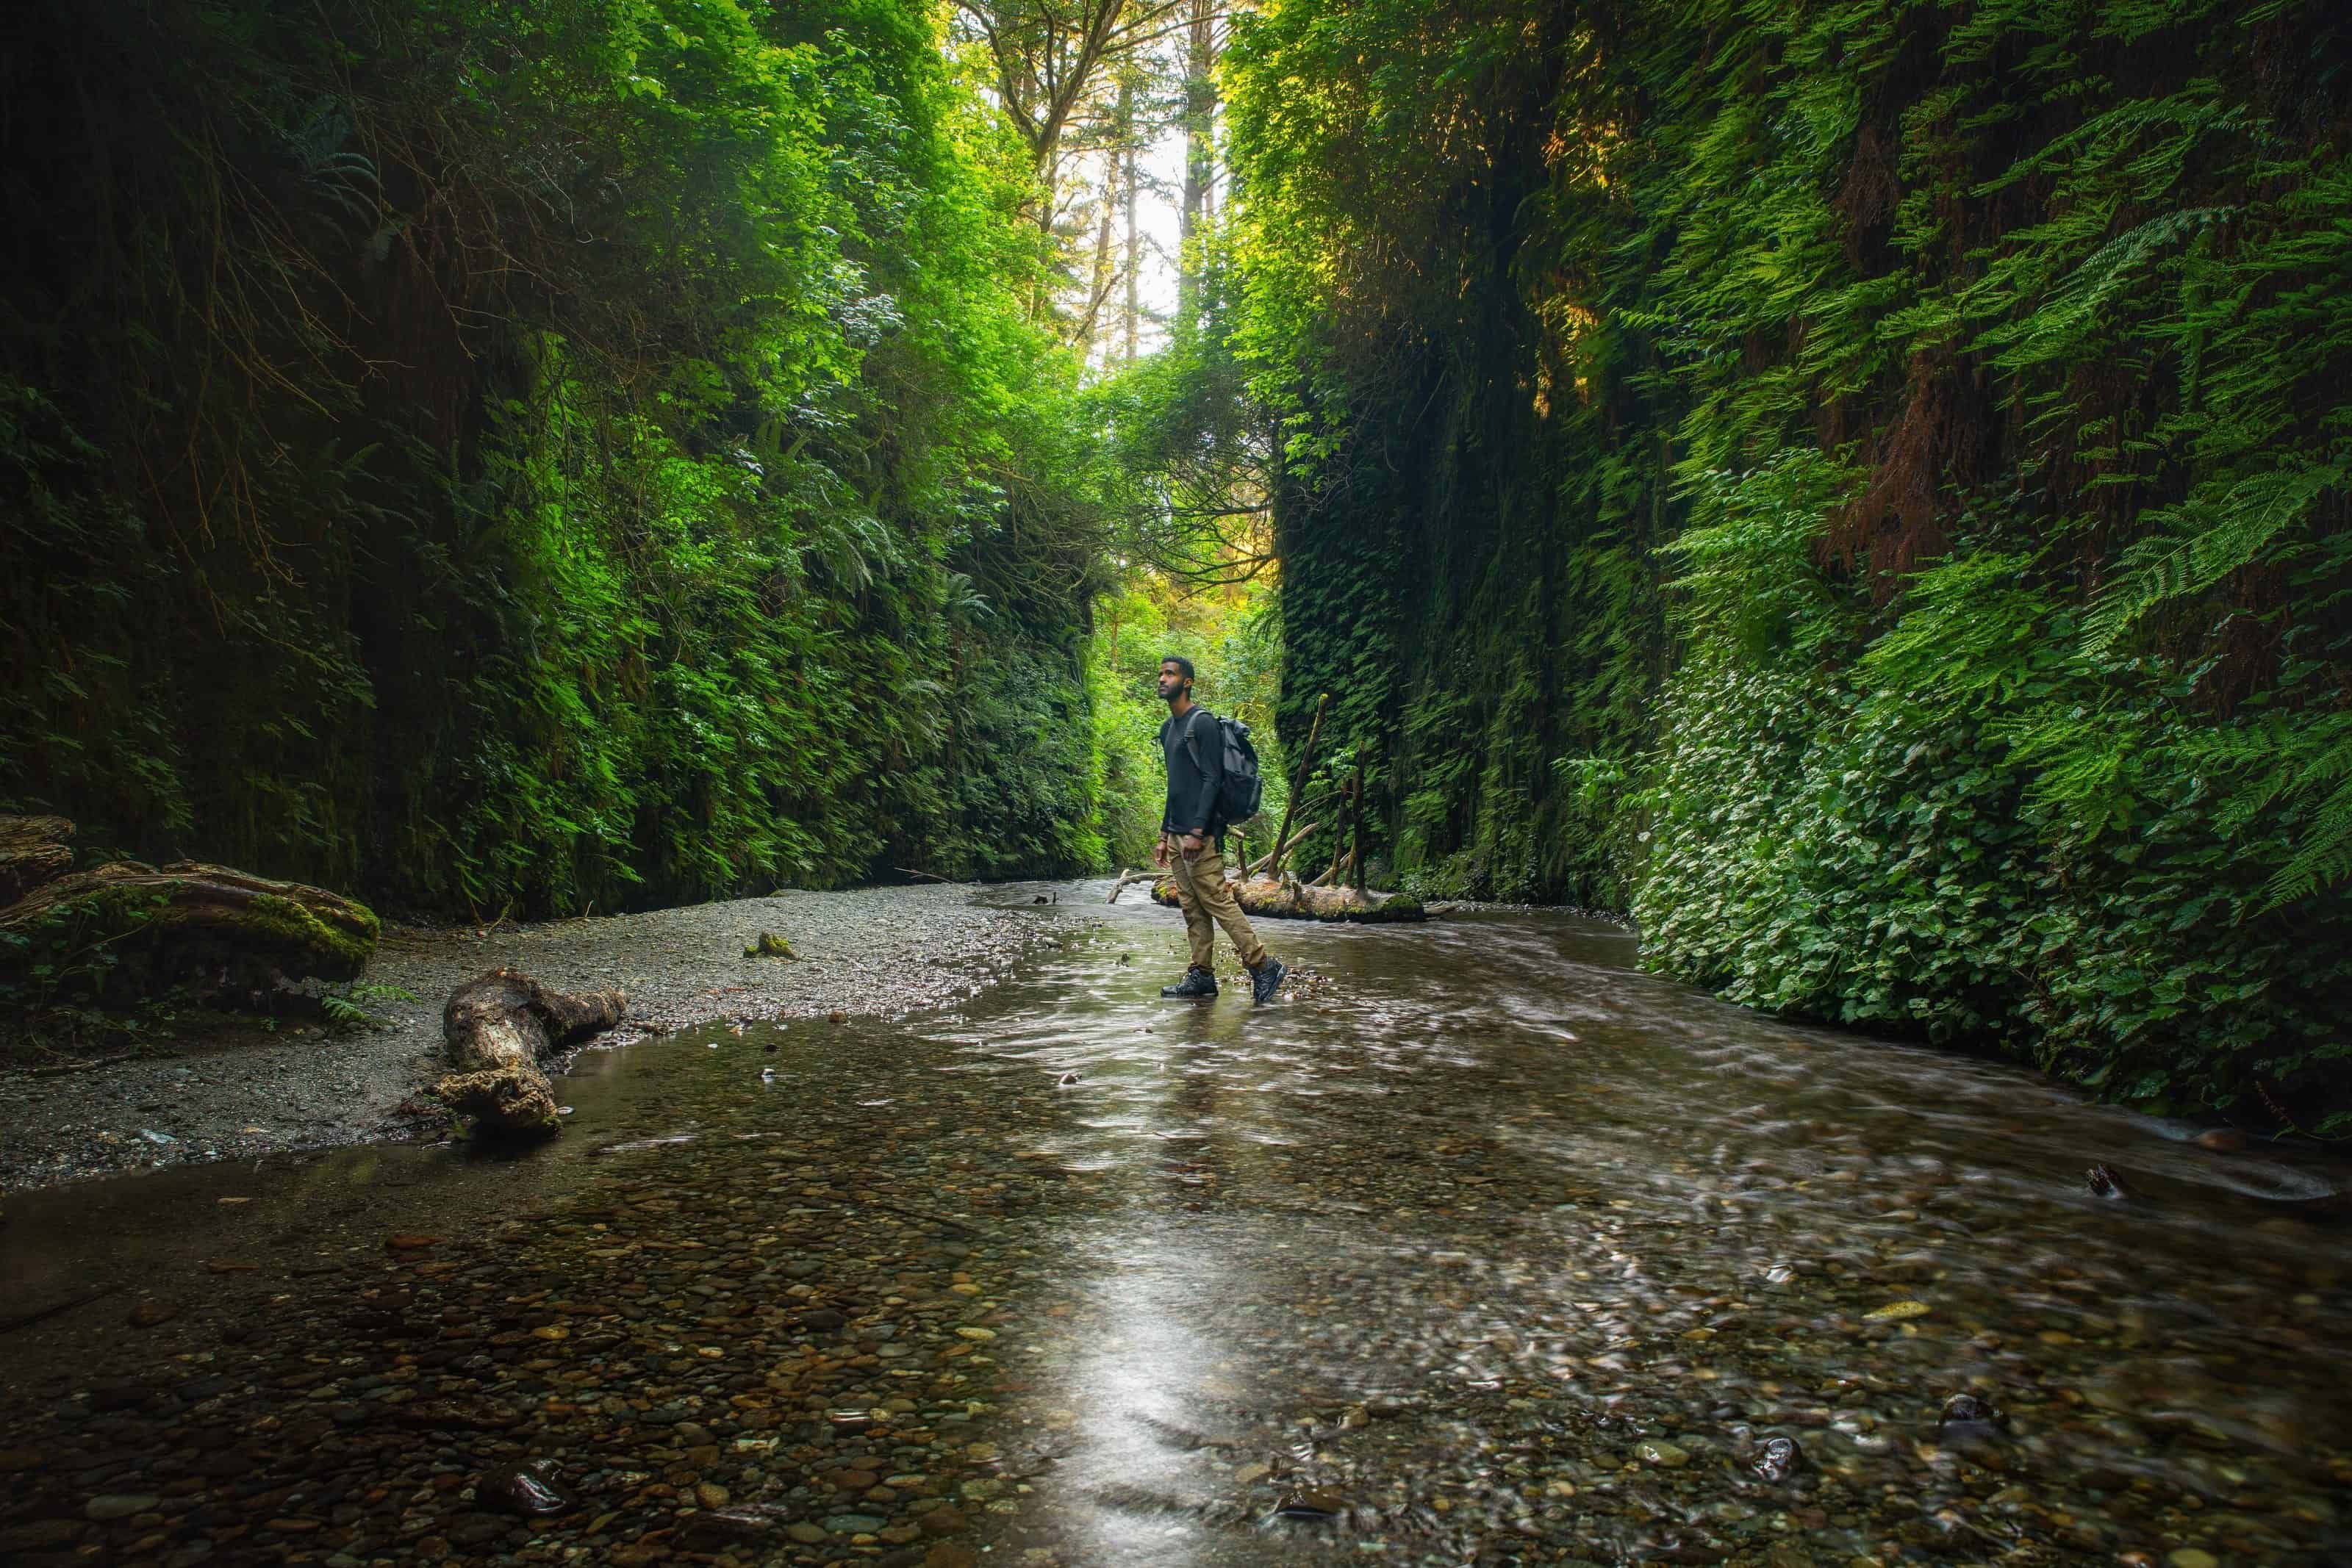 Man with a backpack walking through a shallow river in Fern Canyon on a Northern California road trip.